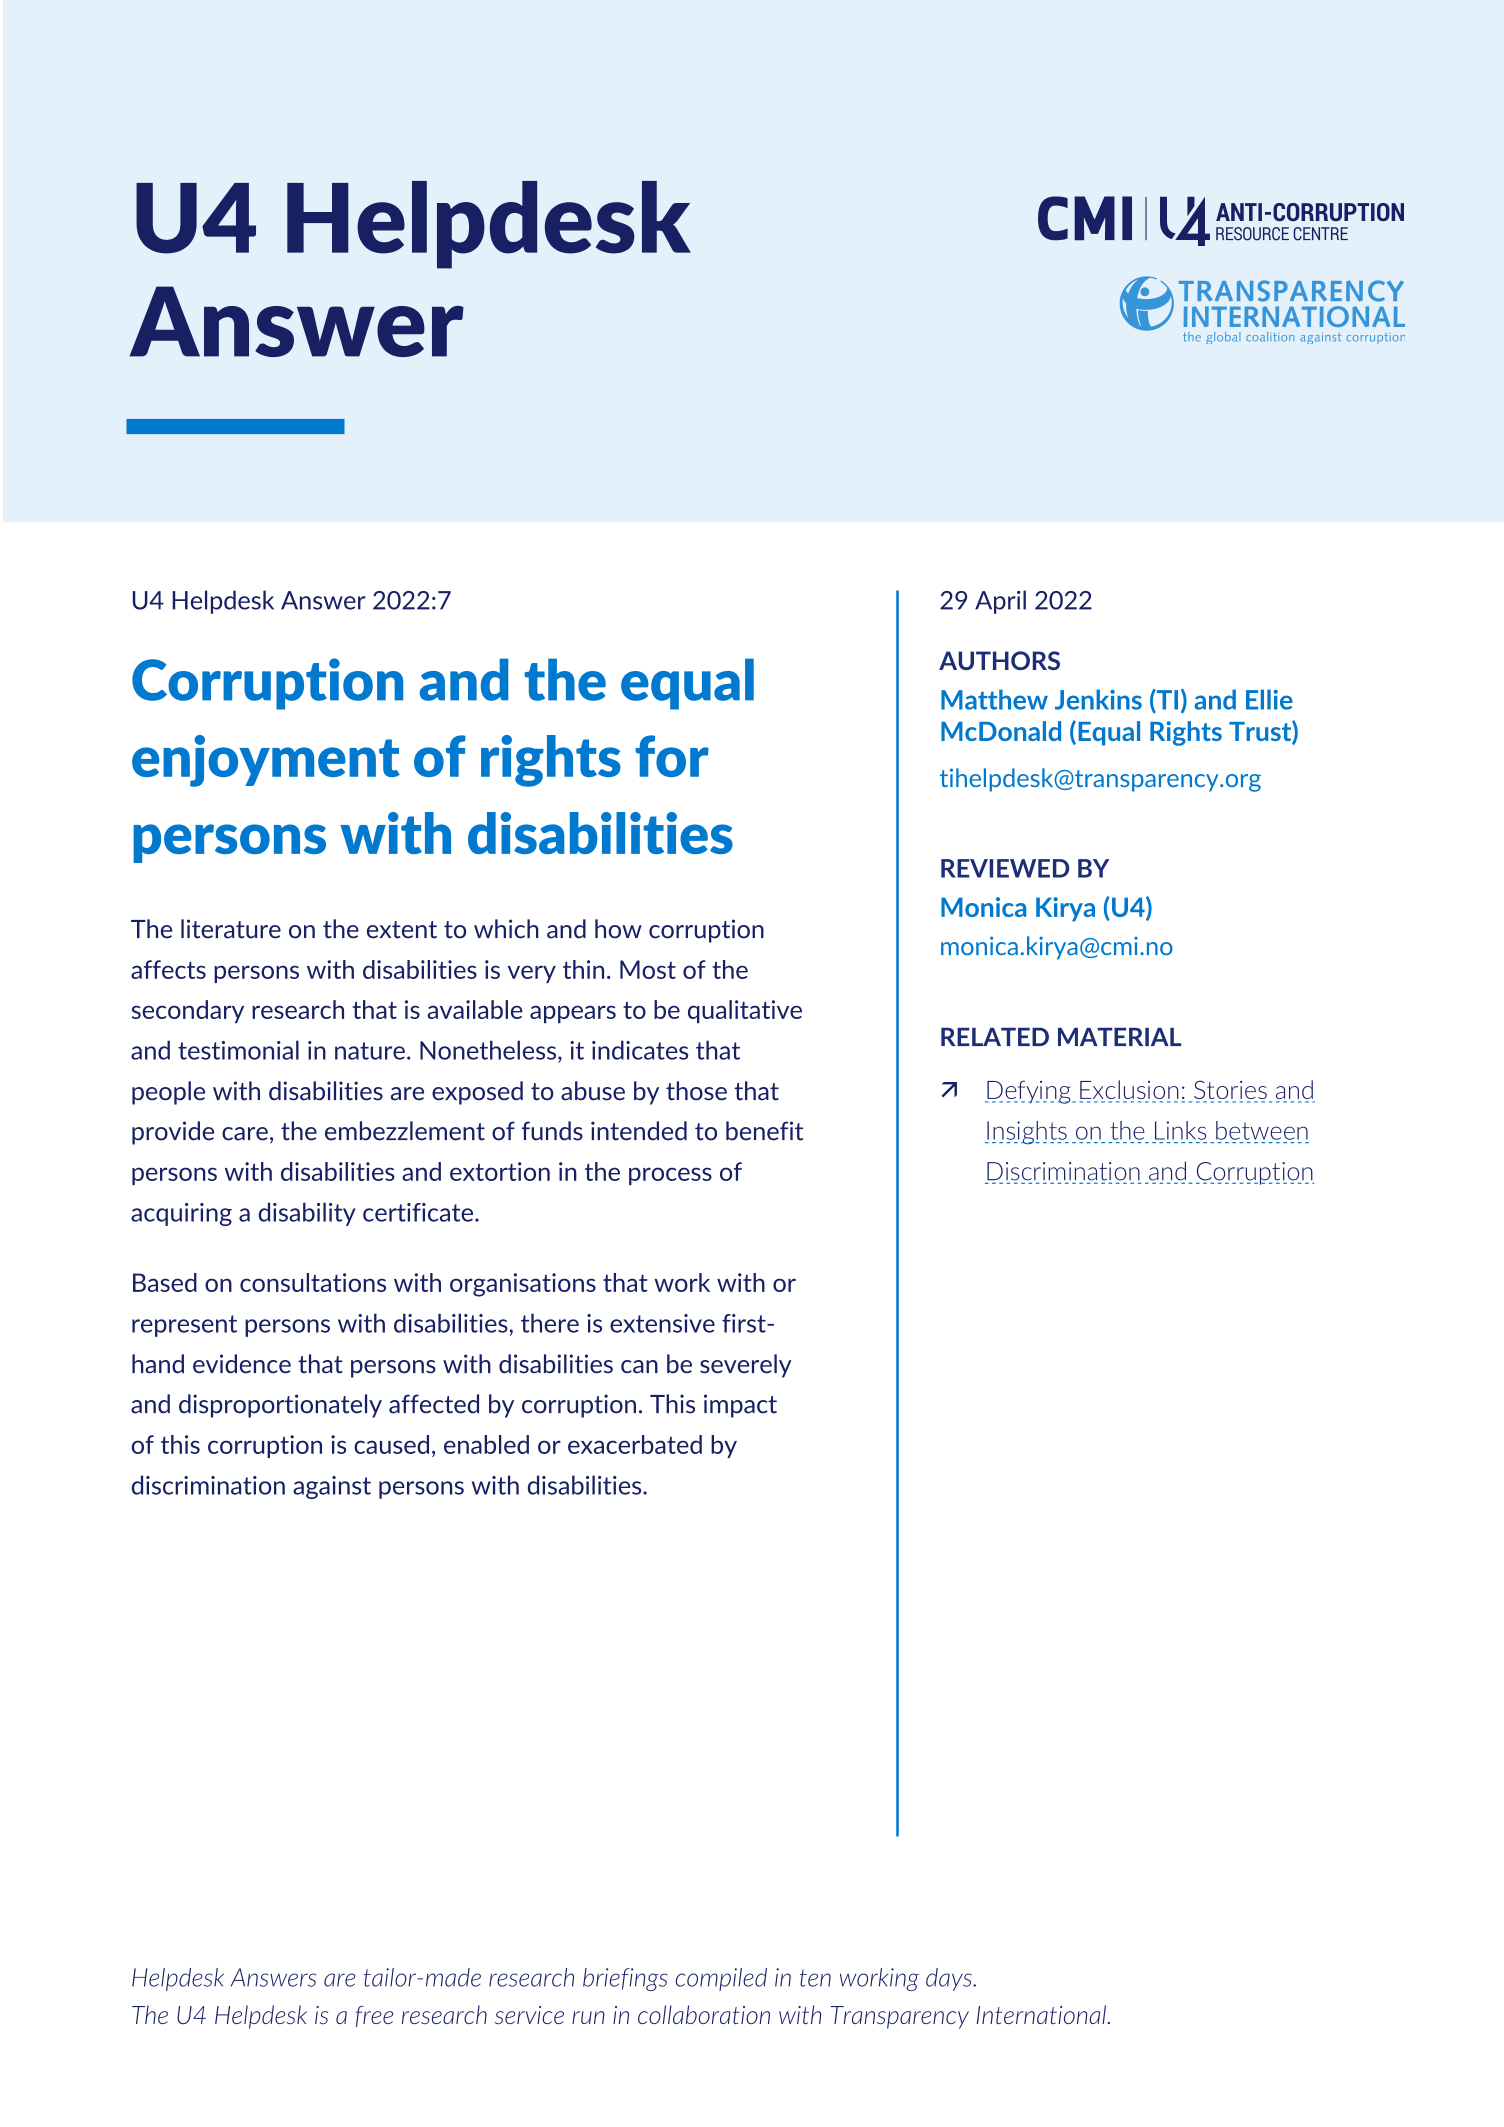 Corruption and the equal enjoyment of rights for persons with disabilities